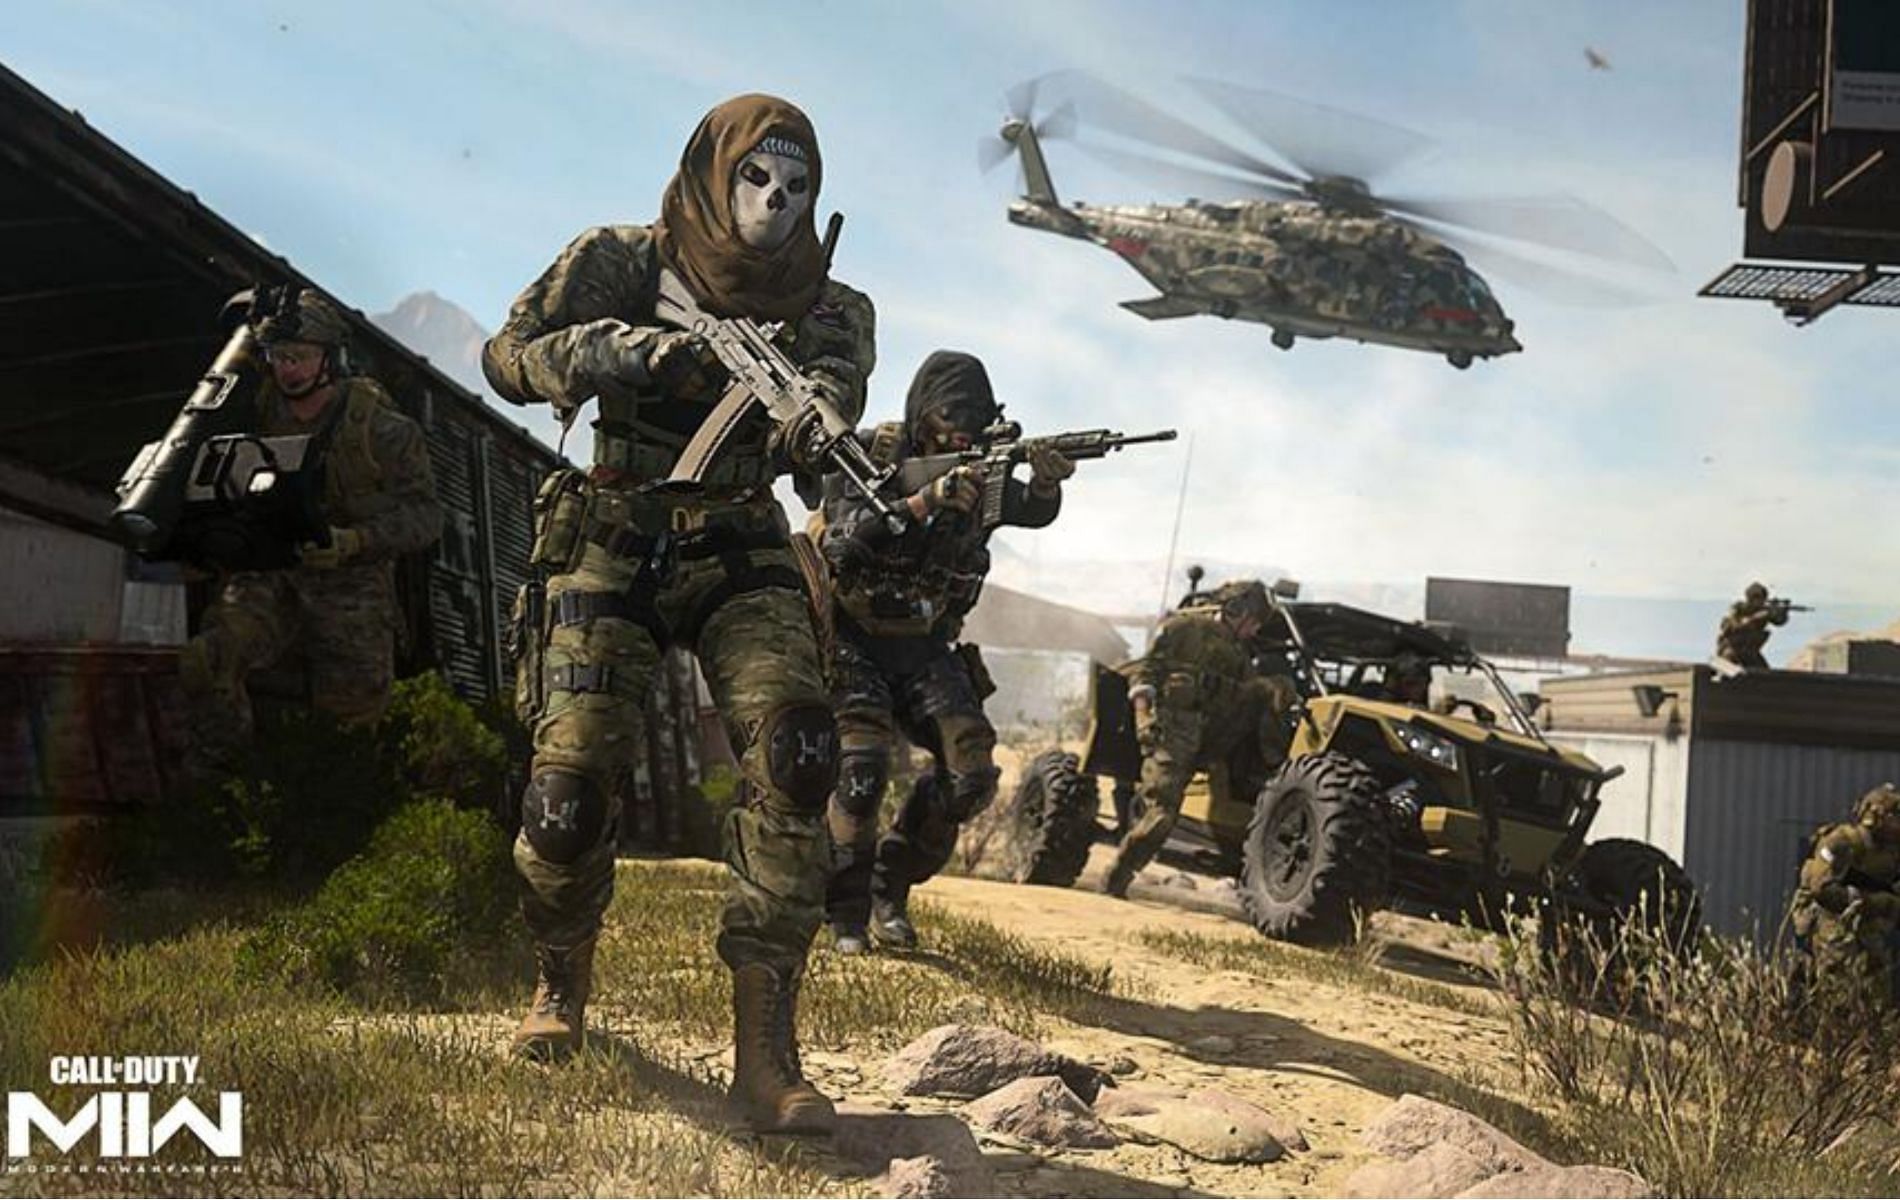 Cheat makers for Call of Duty Modern Warfare 2 to pay $3,000,000 in damages to Activision following a strict court ruling (Image via Activision)